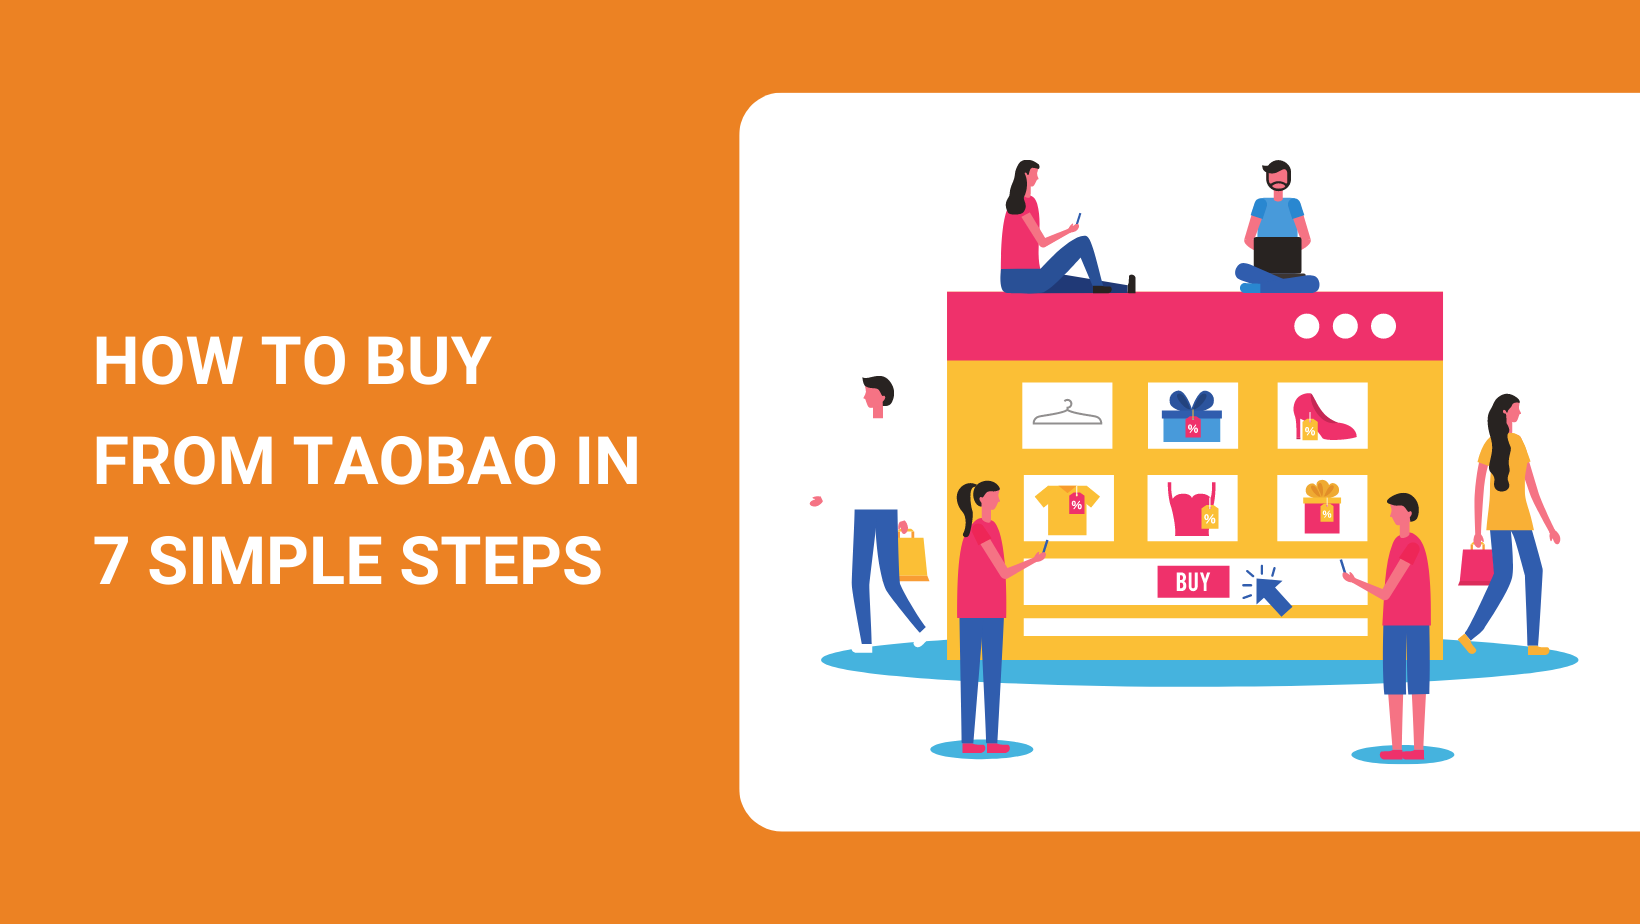 HOW TO BUY FROM TAOBAO IN 7 SIMPLE STEPS